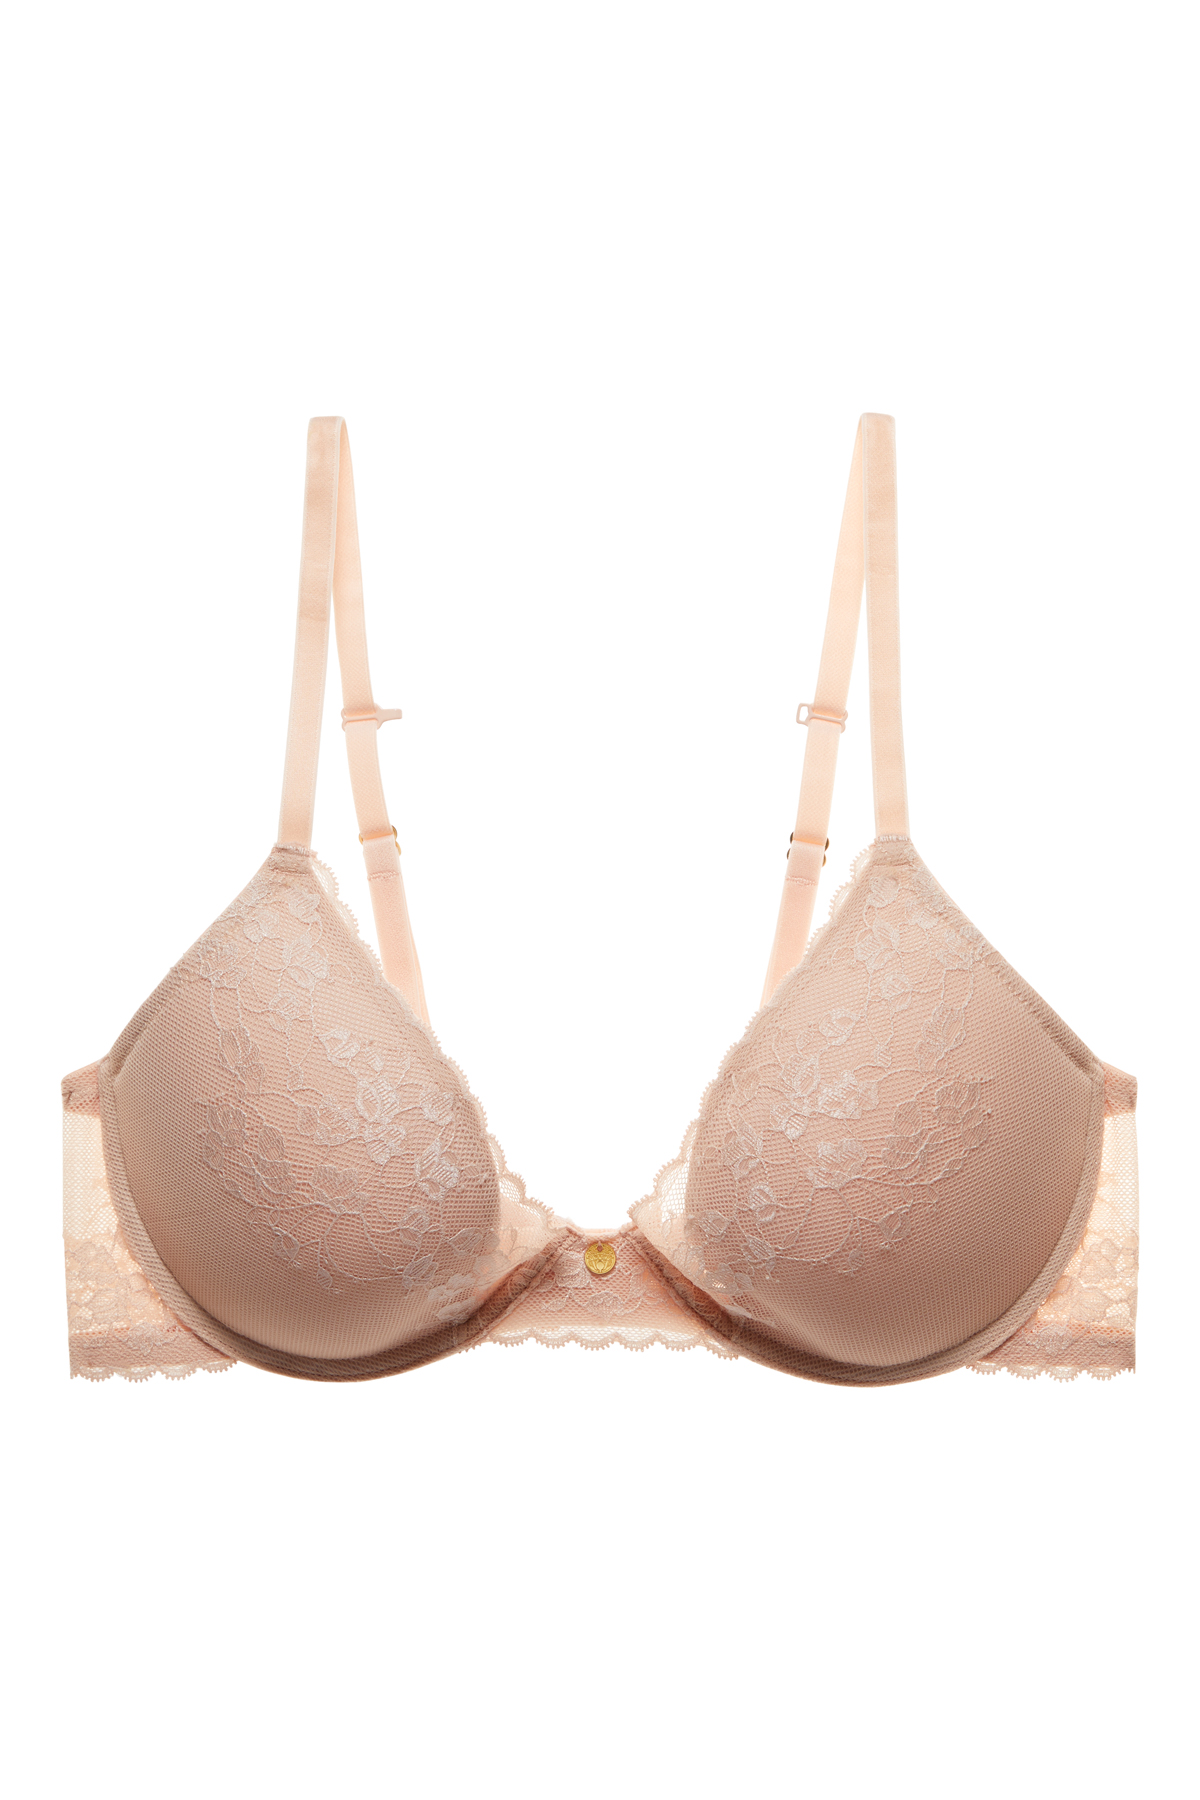 New Arrived Sexy Refreshing Lace Push Up Bras Women Light Thin